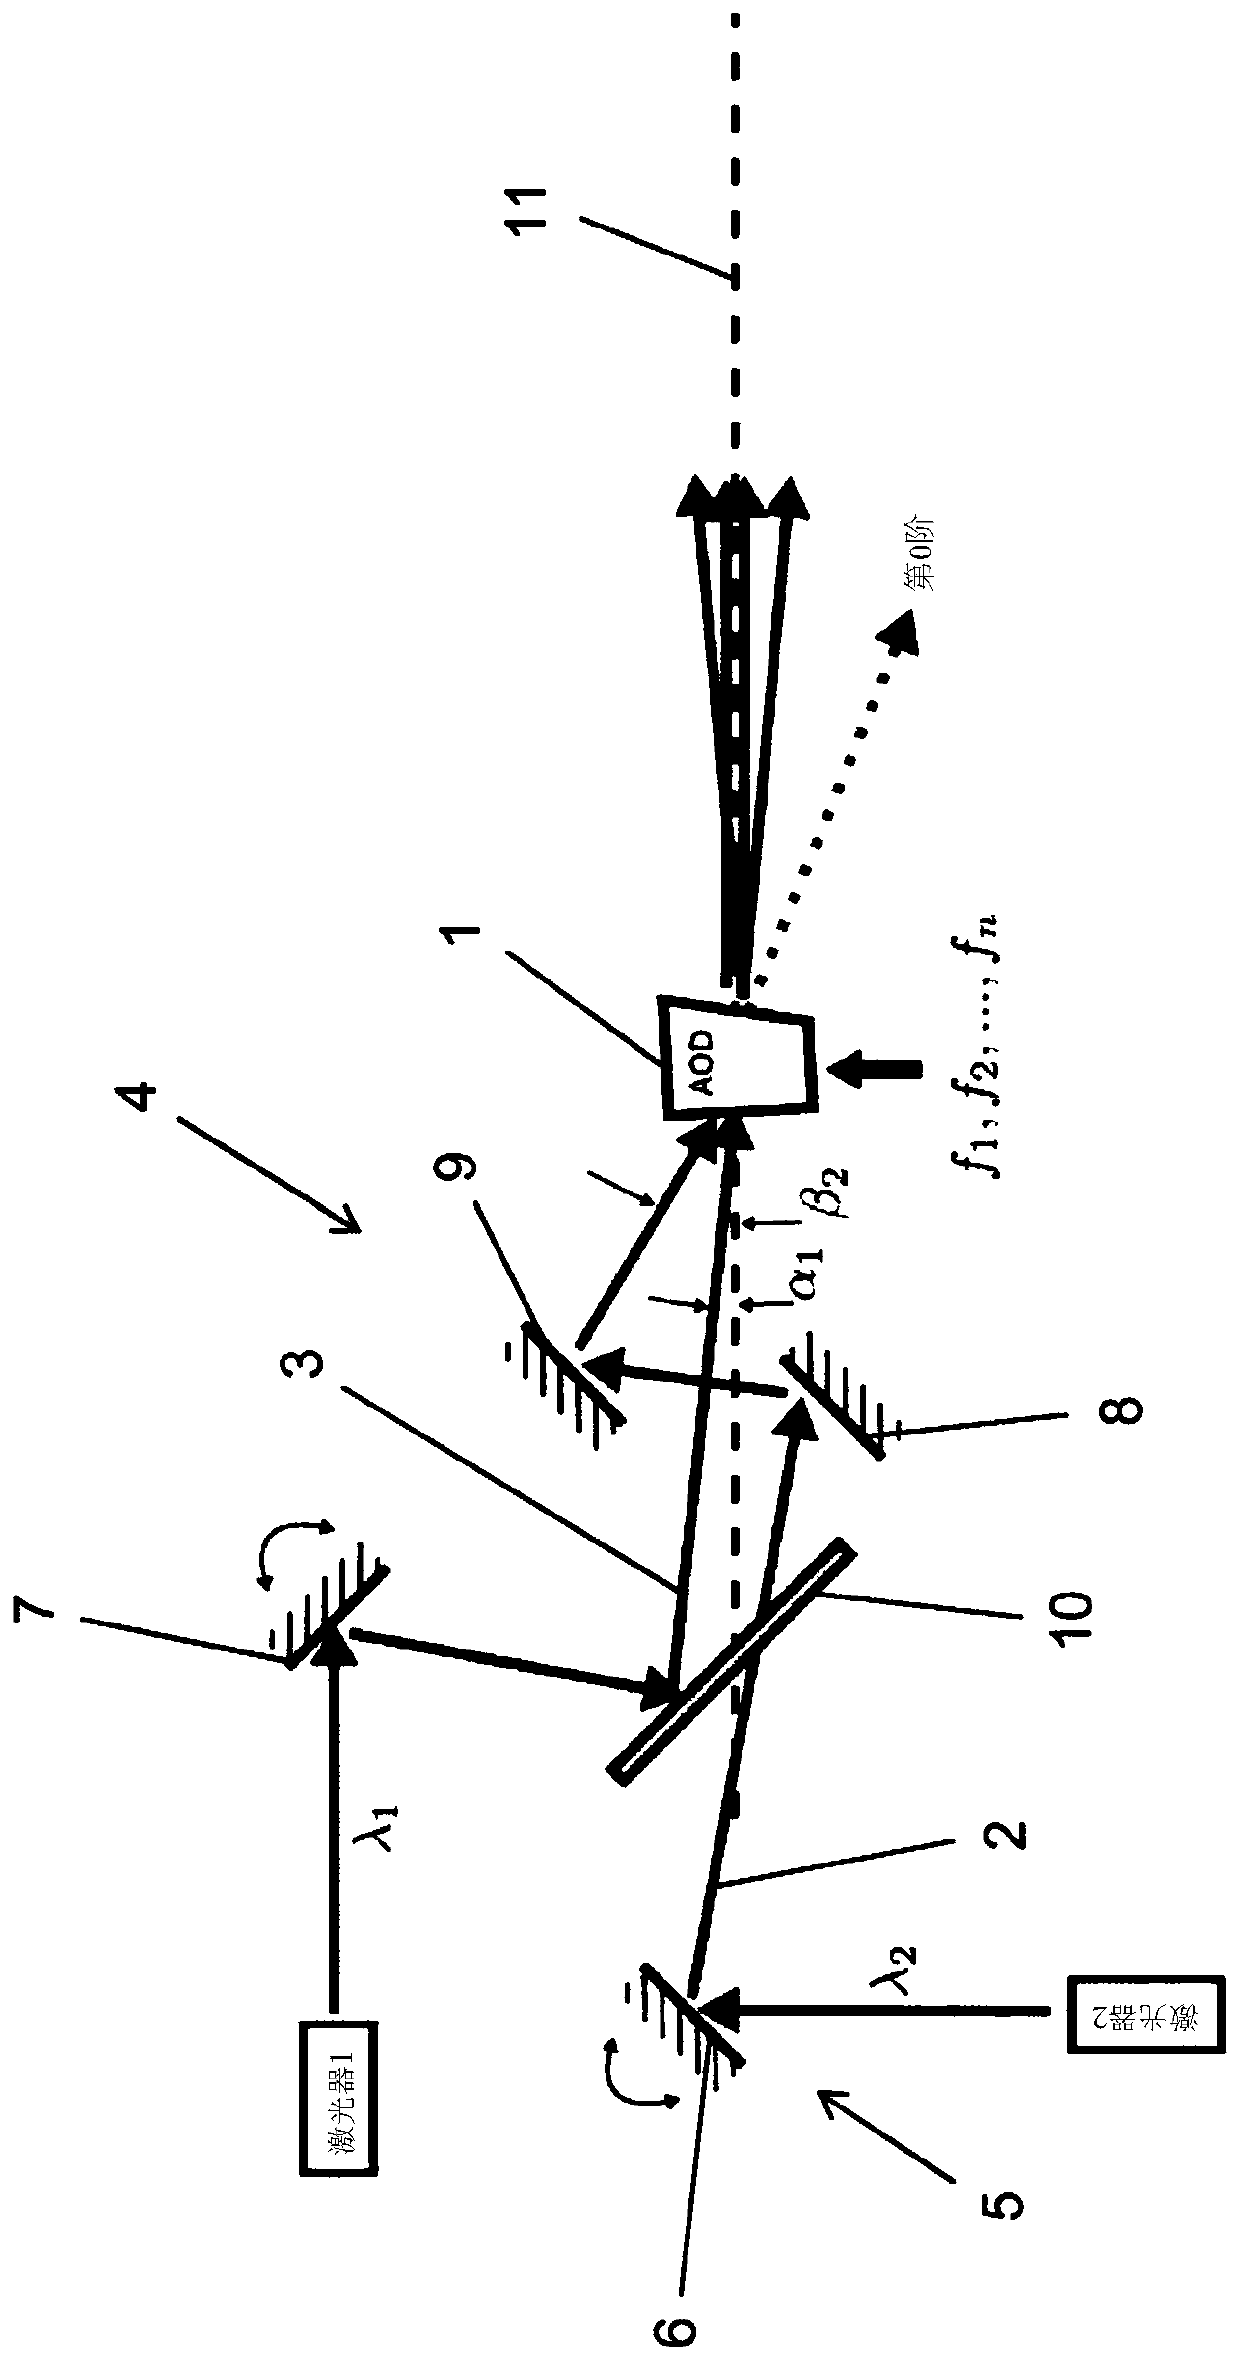 Optical assembly and method for influencing the beam direction of at least one light beam